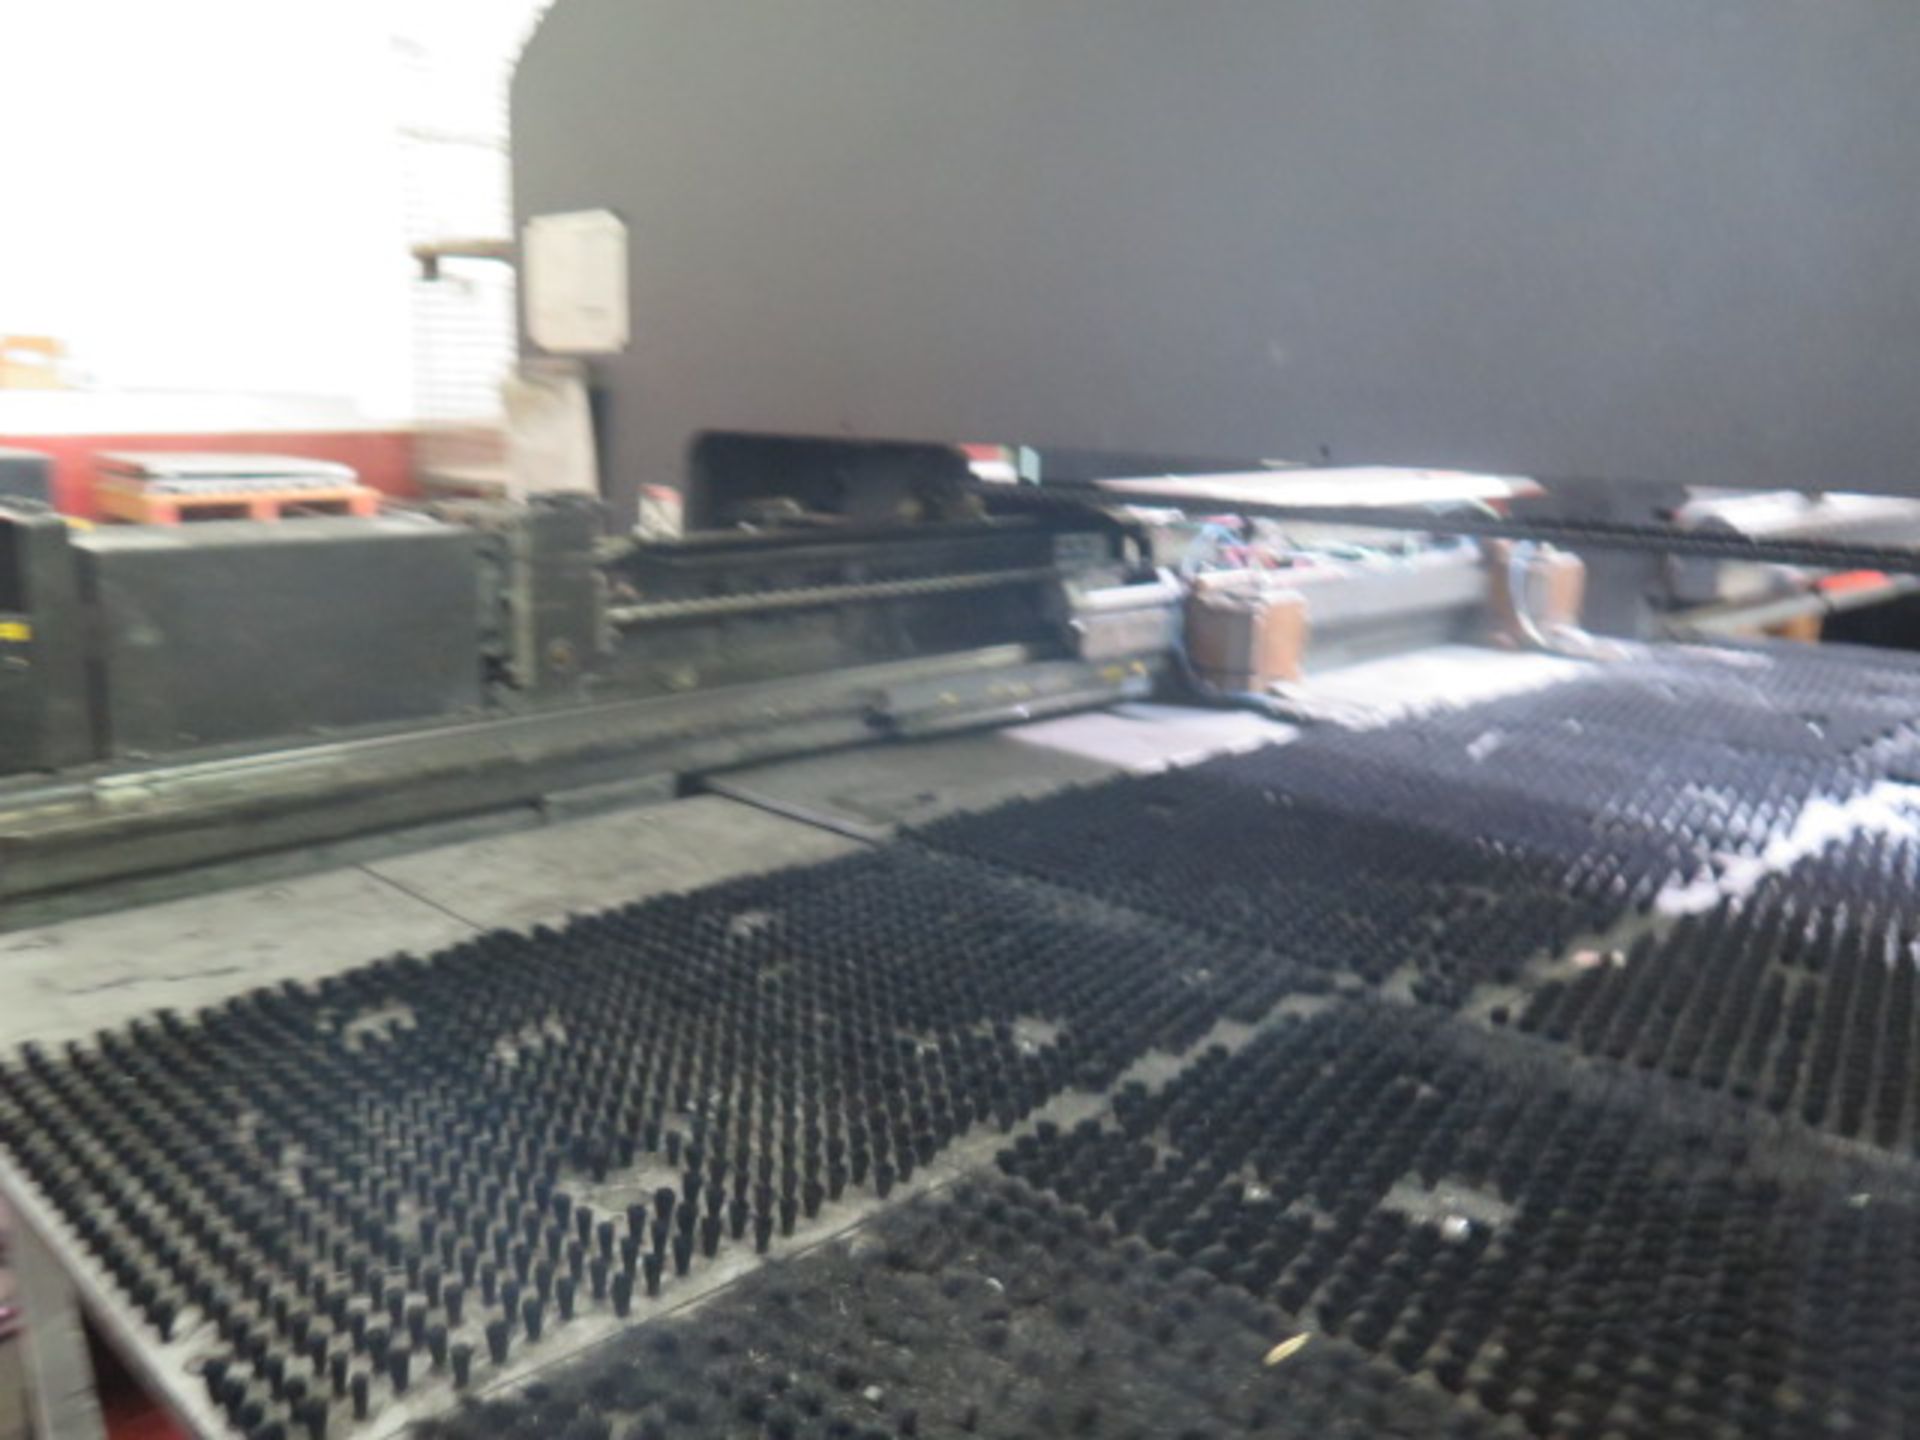 Amada VIPROS 255 30 Ton CNC Turret Punch Press w/ Fanuc 18-P Controls, 58-Station Turret, SOLD AS IS - Image 9 of 23